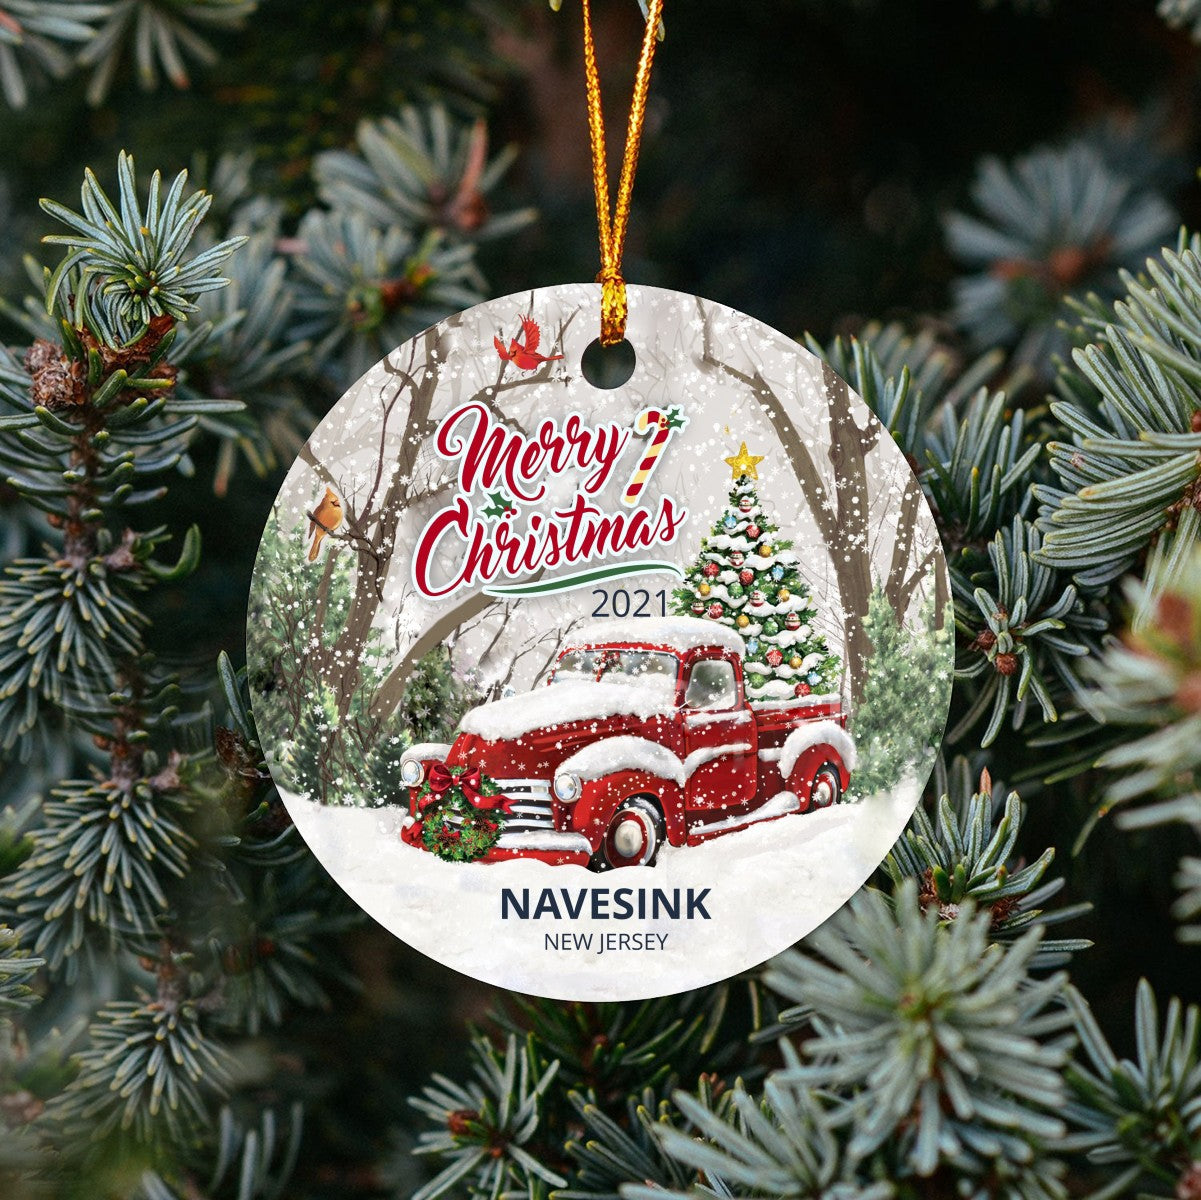 Christmas Tree Ornaments Navesink - Ornament With Name City, State Navesink New Jersey NJ Ornament - Red Truck Xmas Ornaments 3'' Plastic Gift For Family, Friend And Housewarming